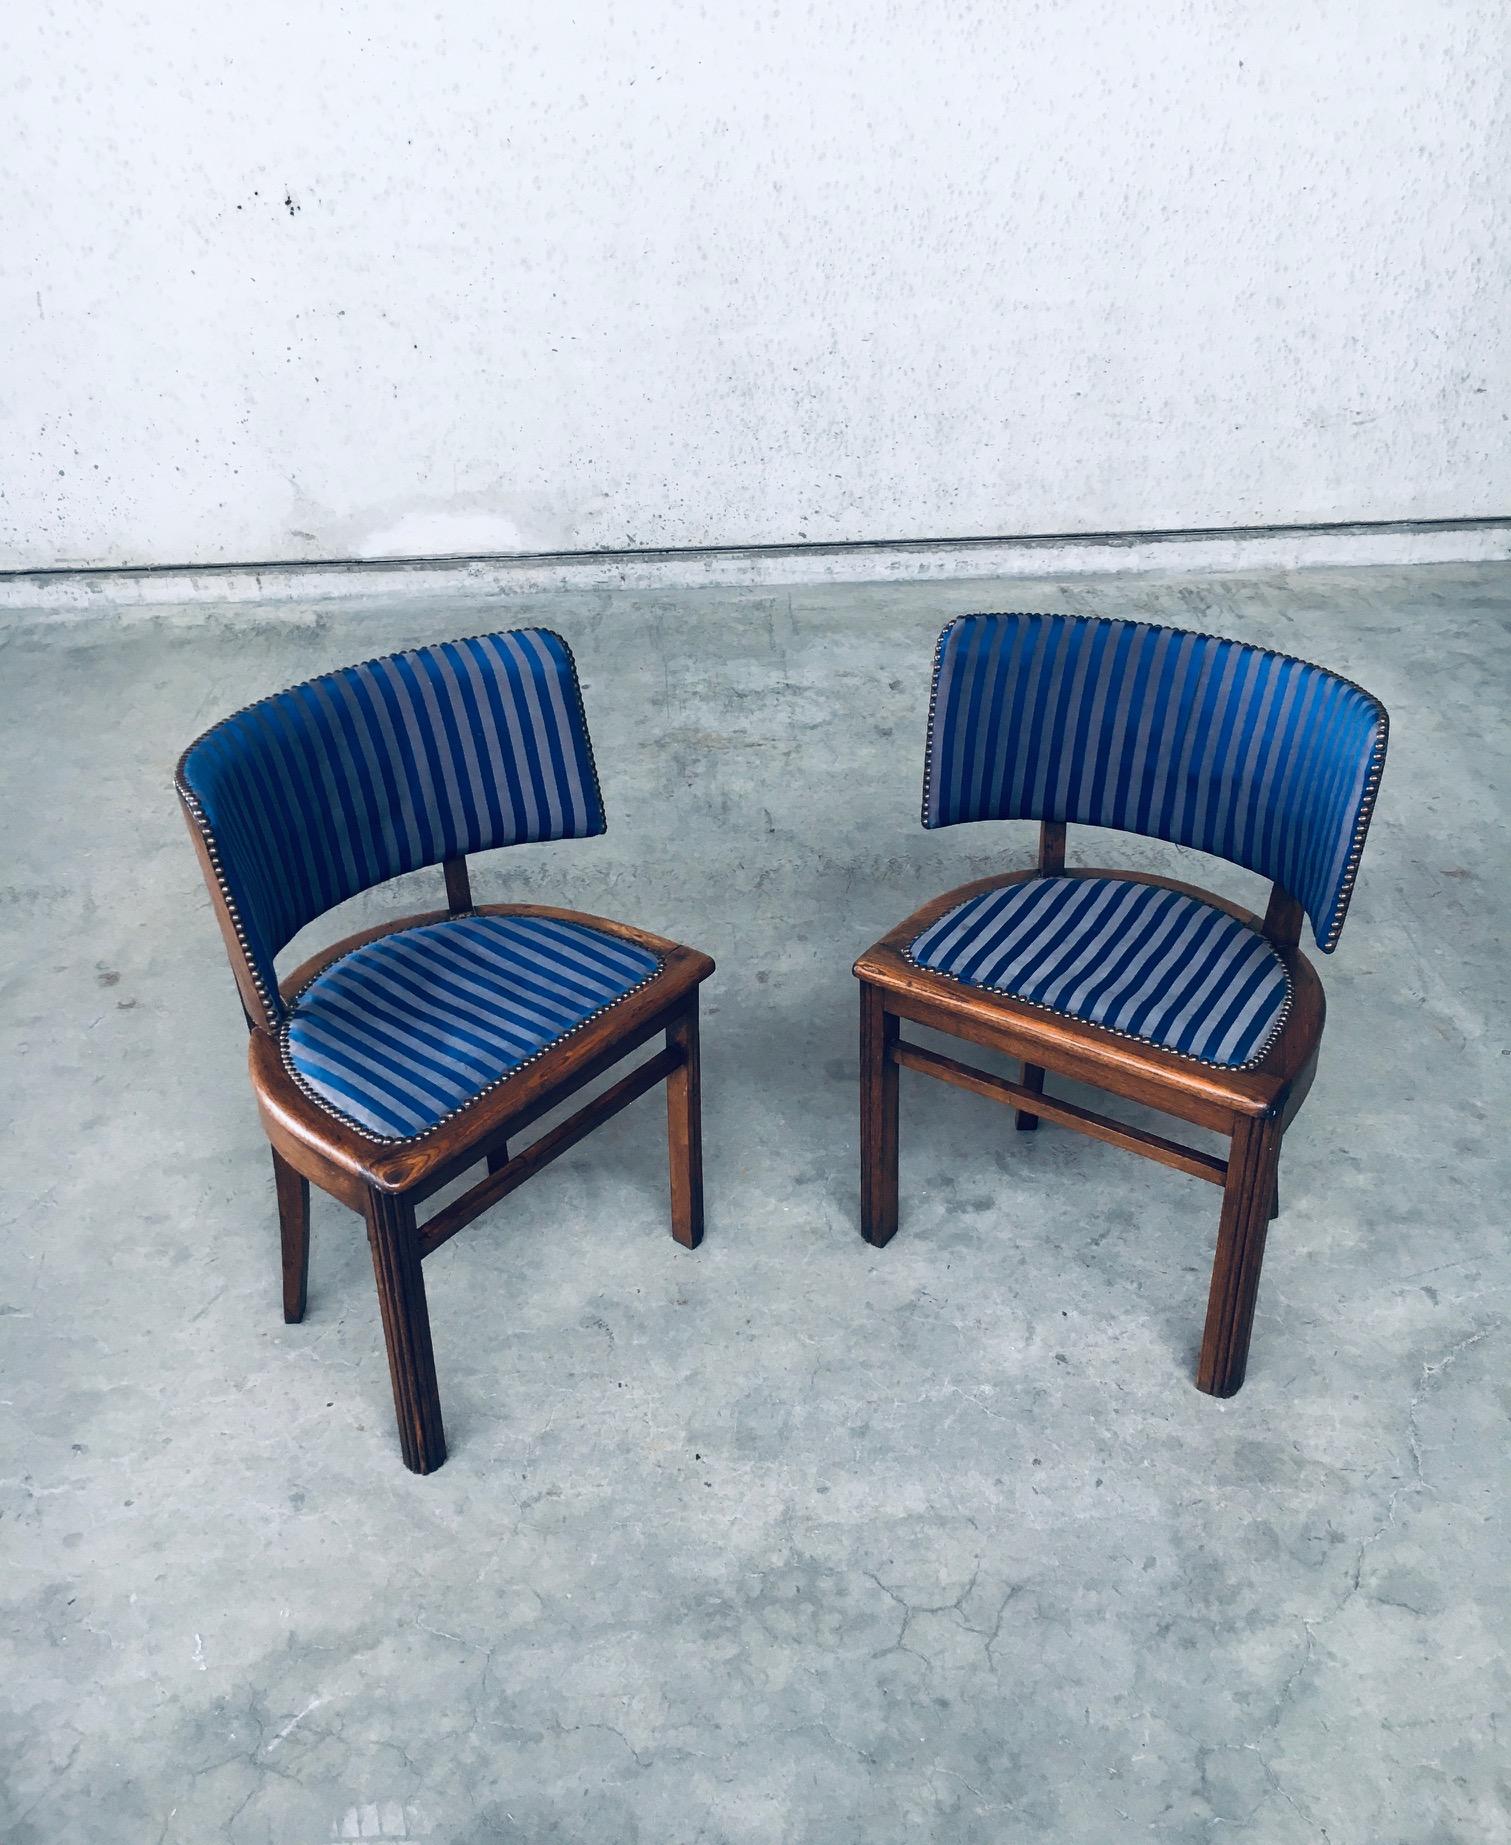 Mid-20th Century Art Deco Curved Back Side Chair Set, France 1930's For Sale